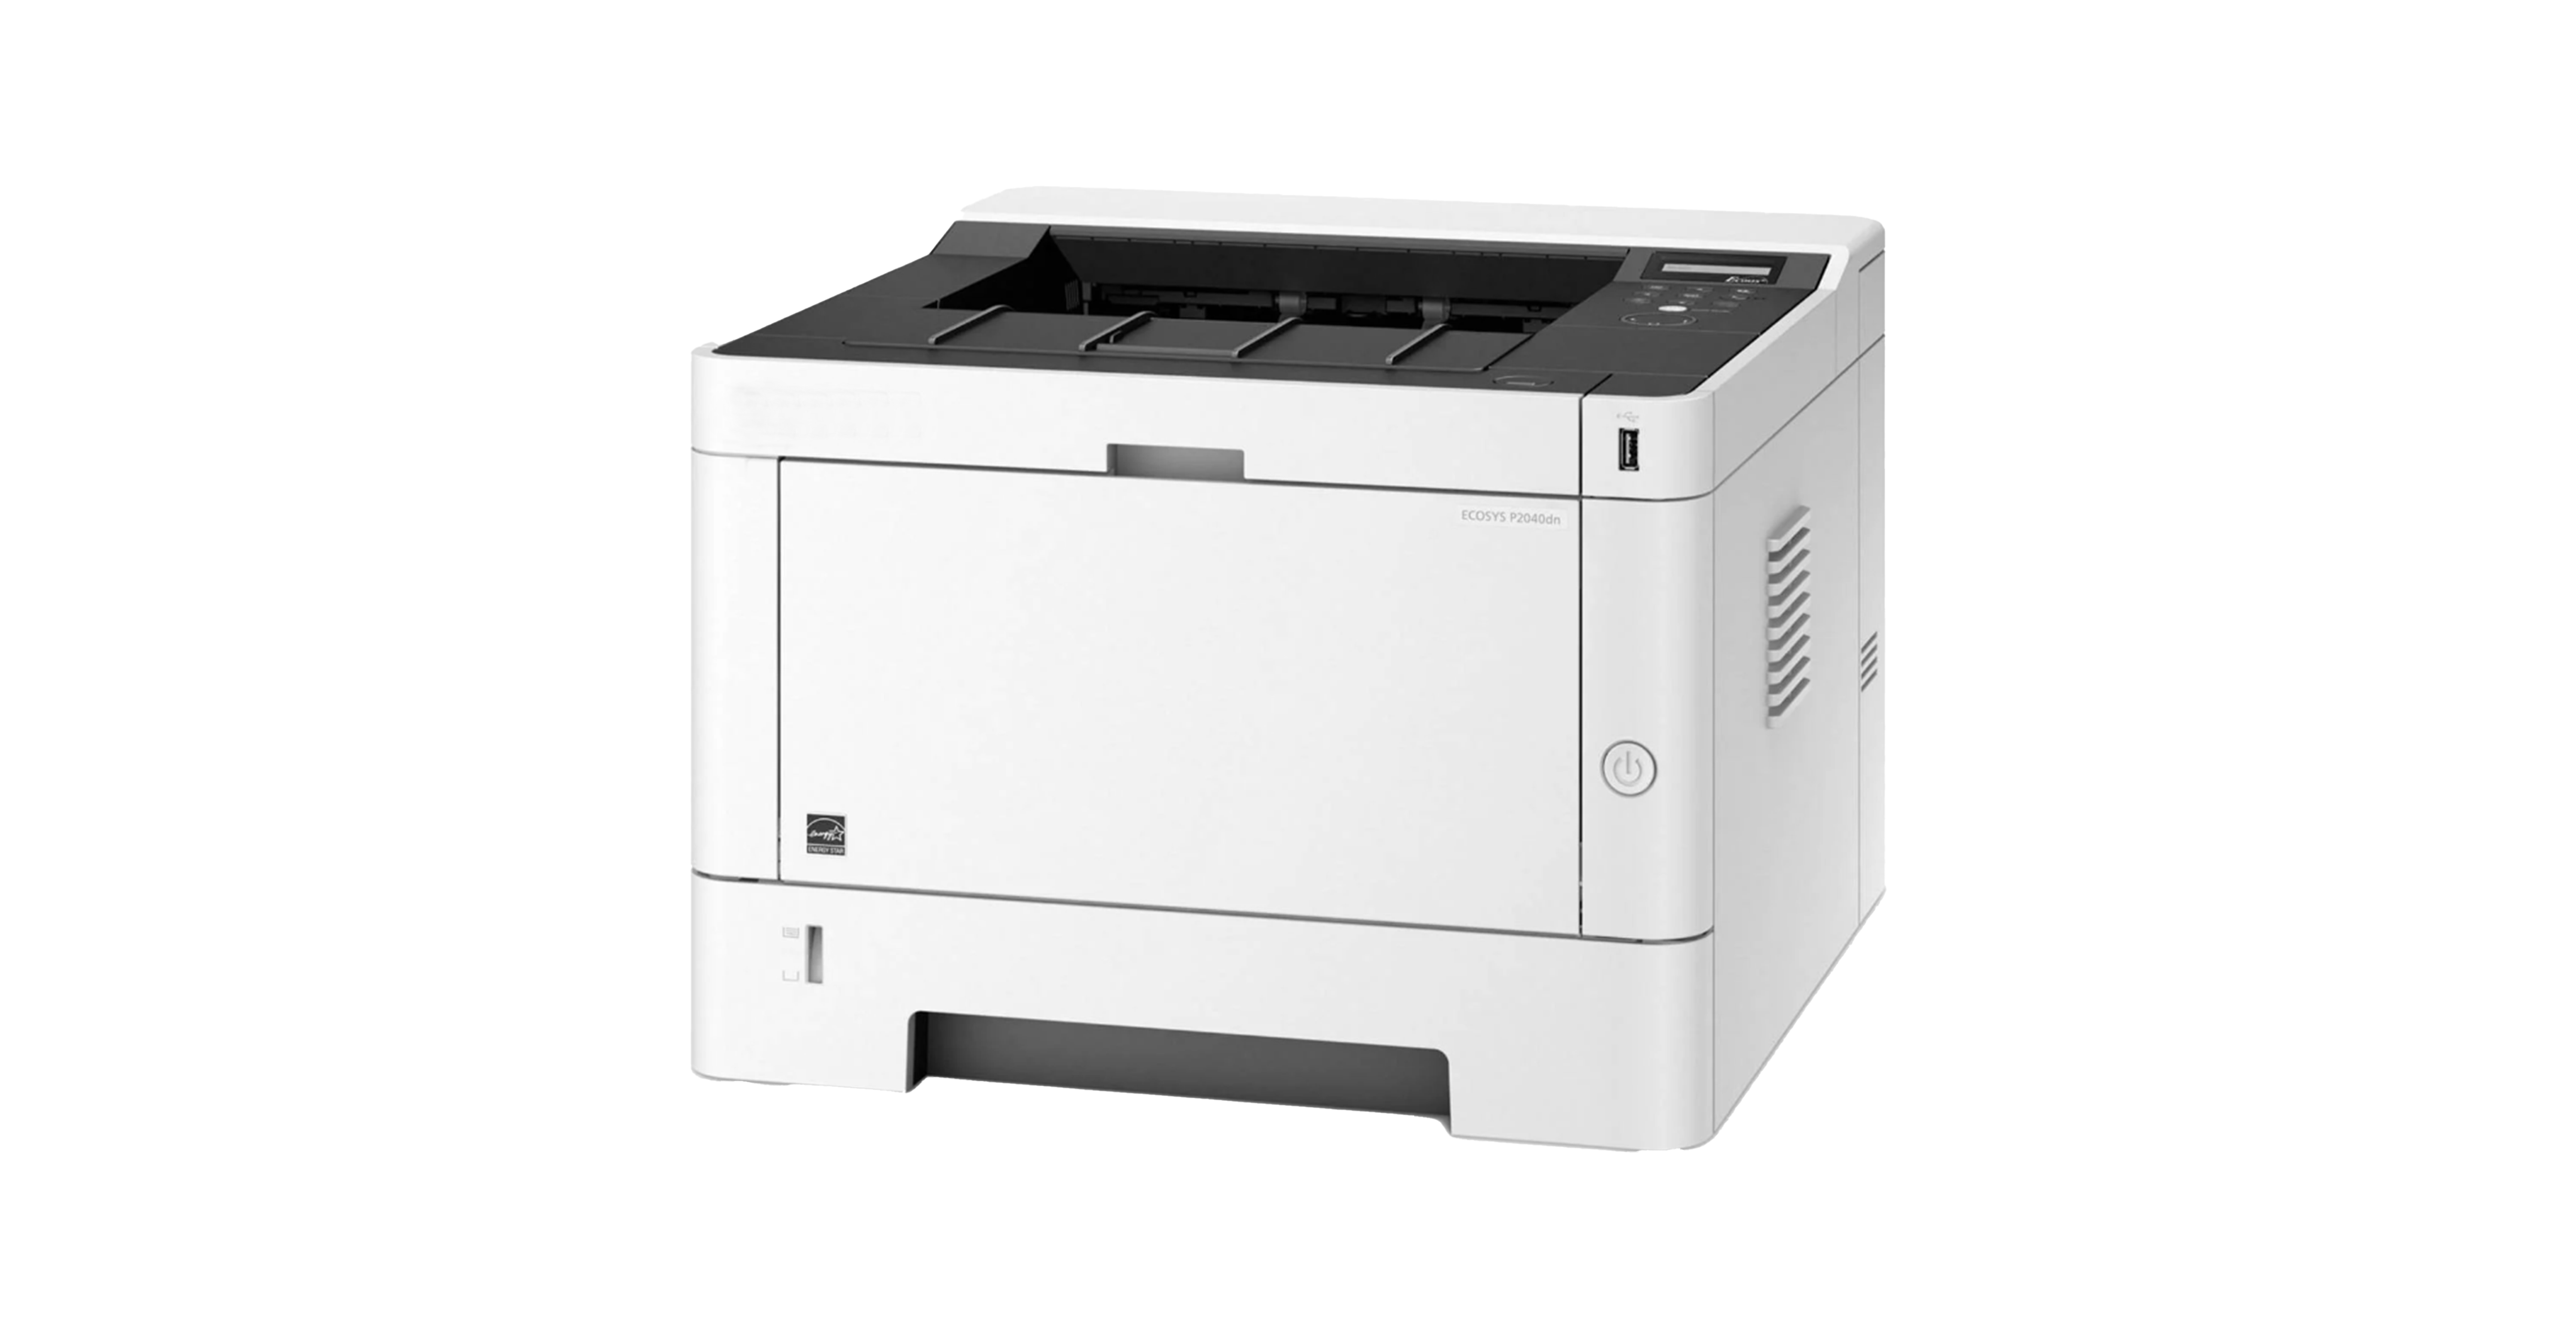 Refurbished Office Printers | Daisy Business Solutions